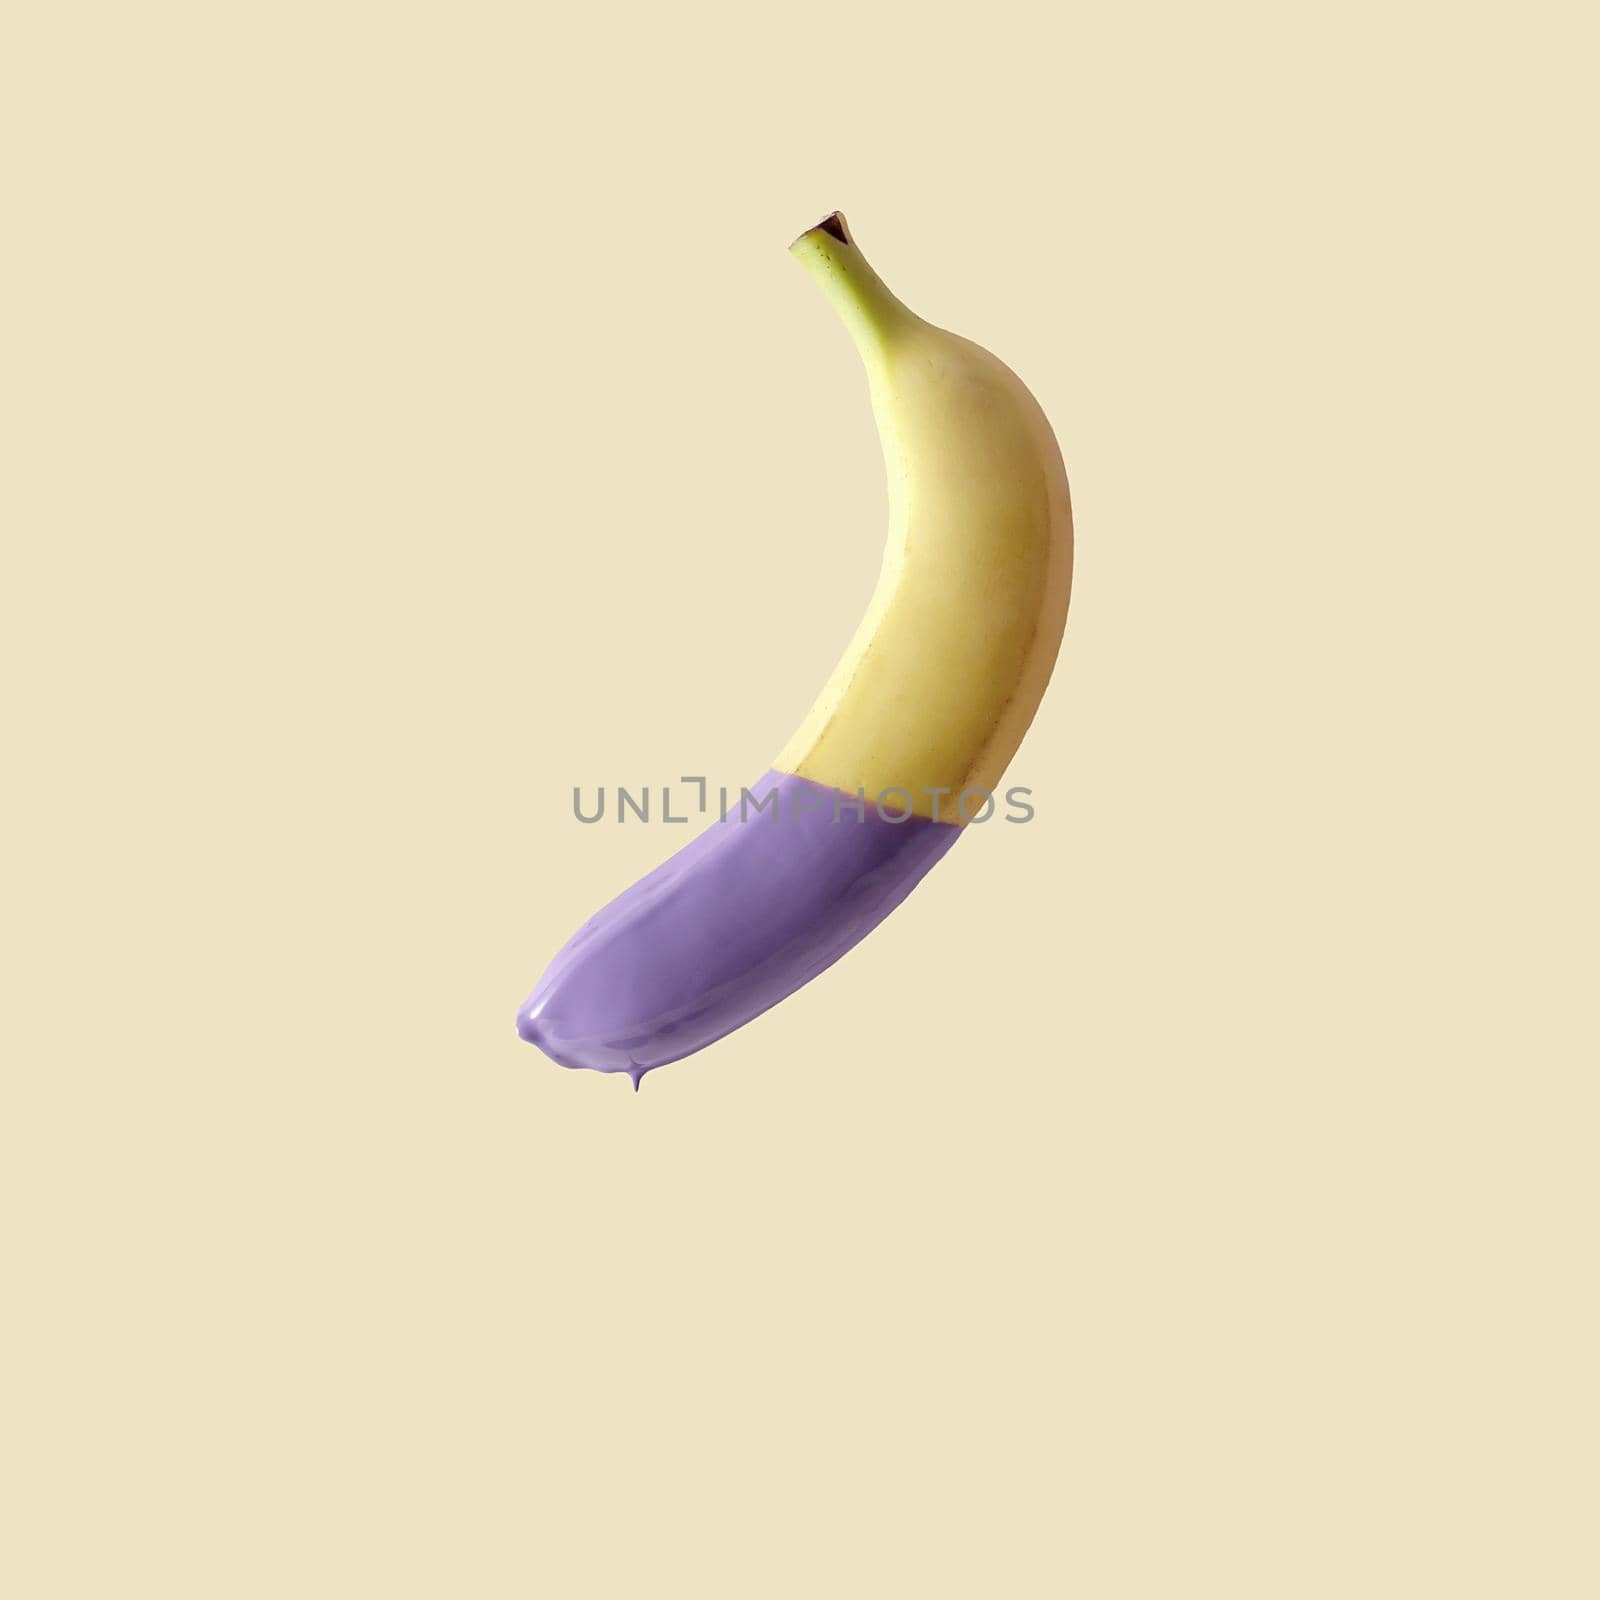 Banana in paint on a yellow background. by sergii_gnatiuk